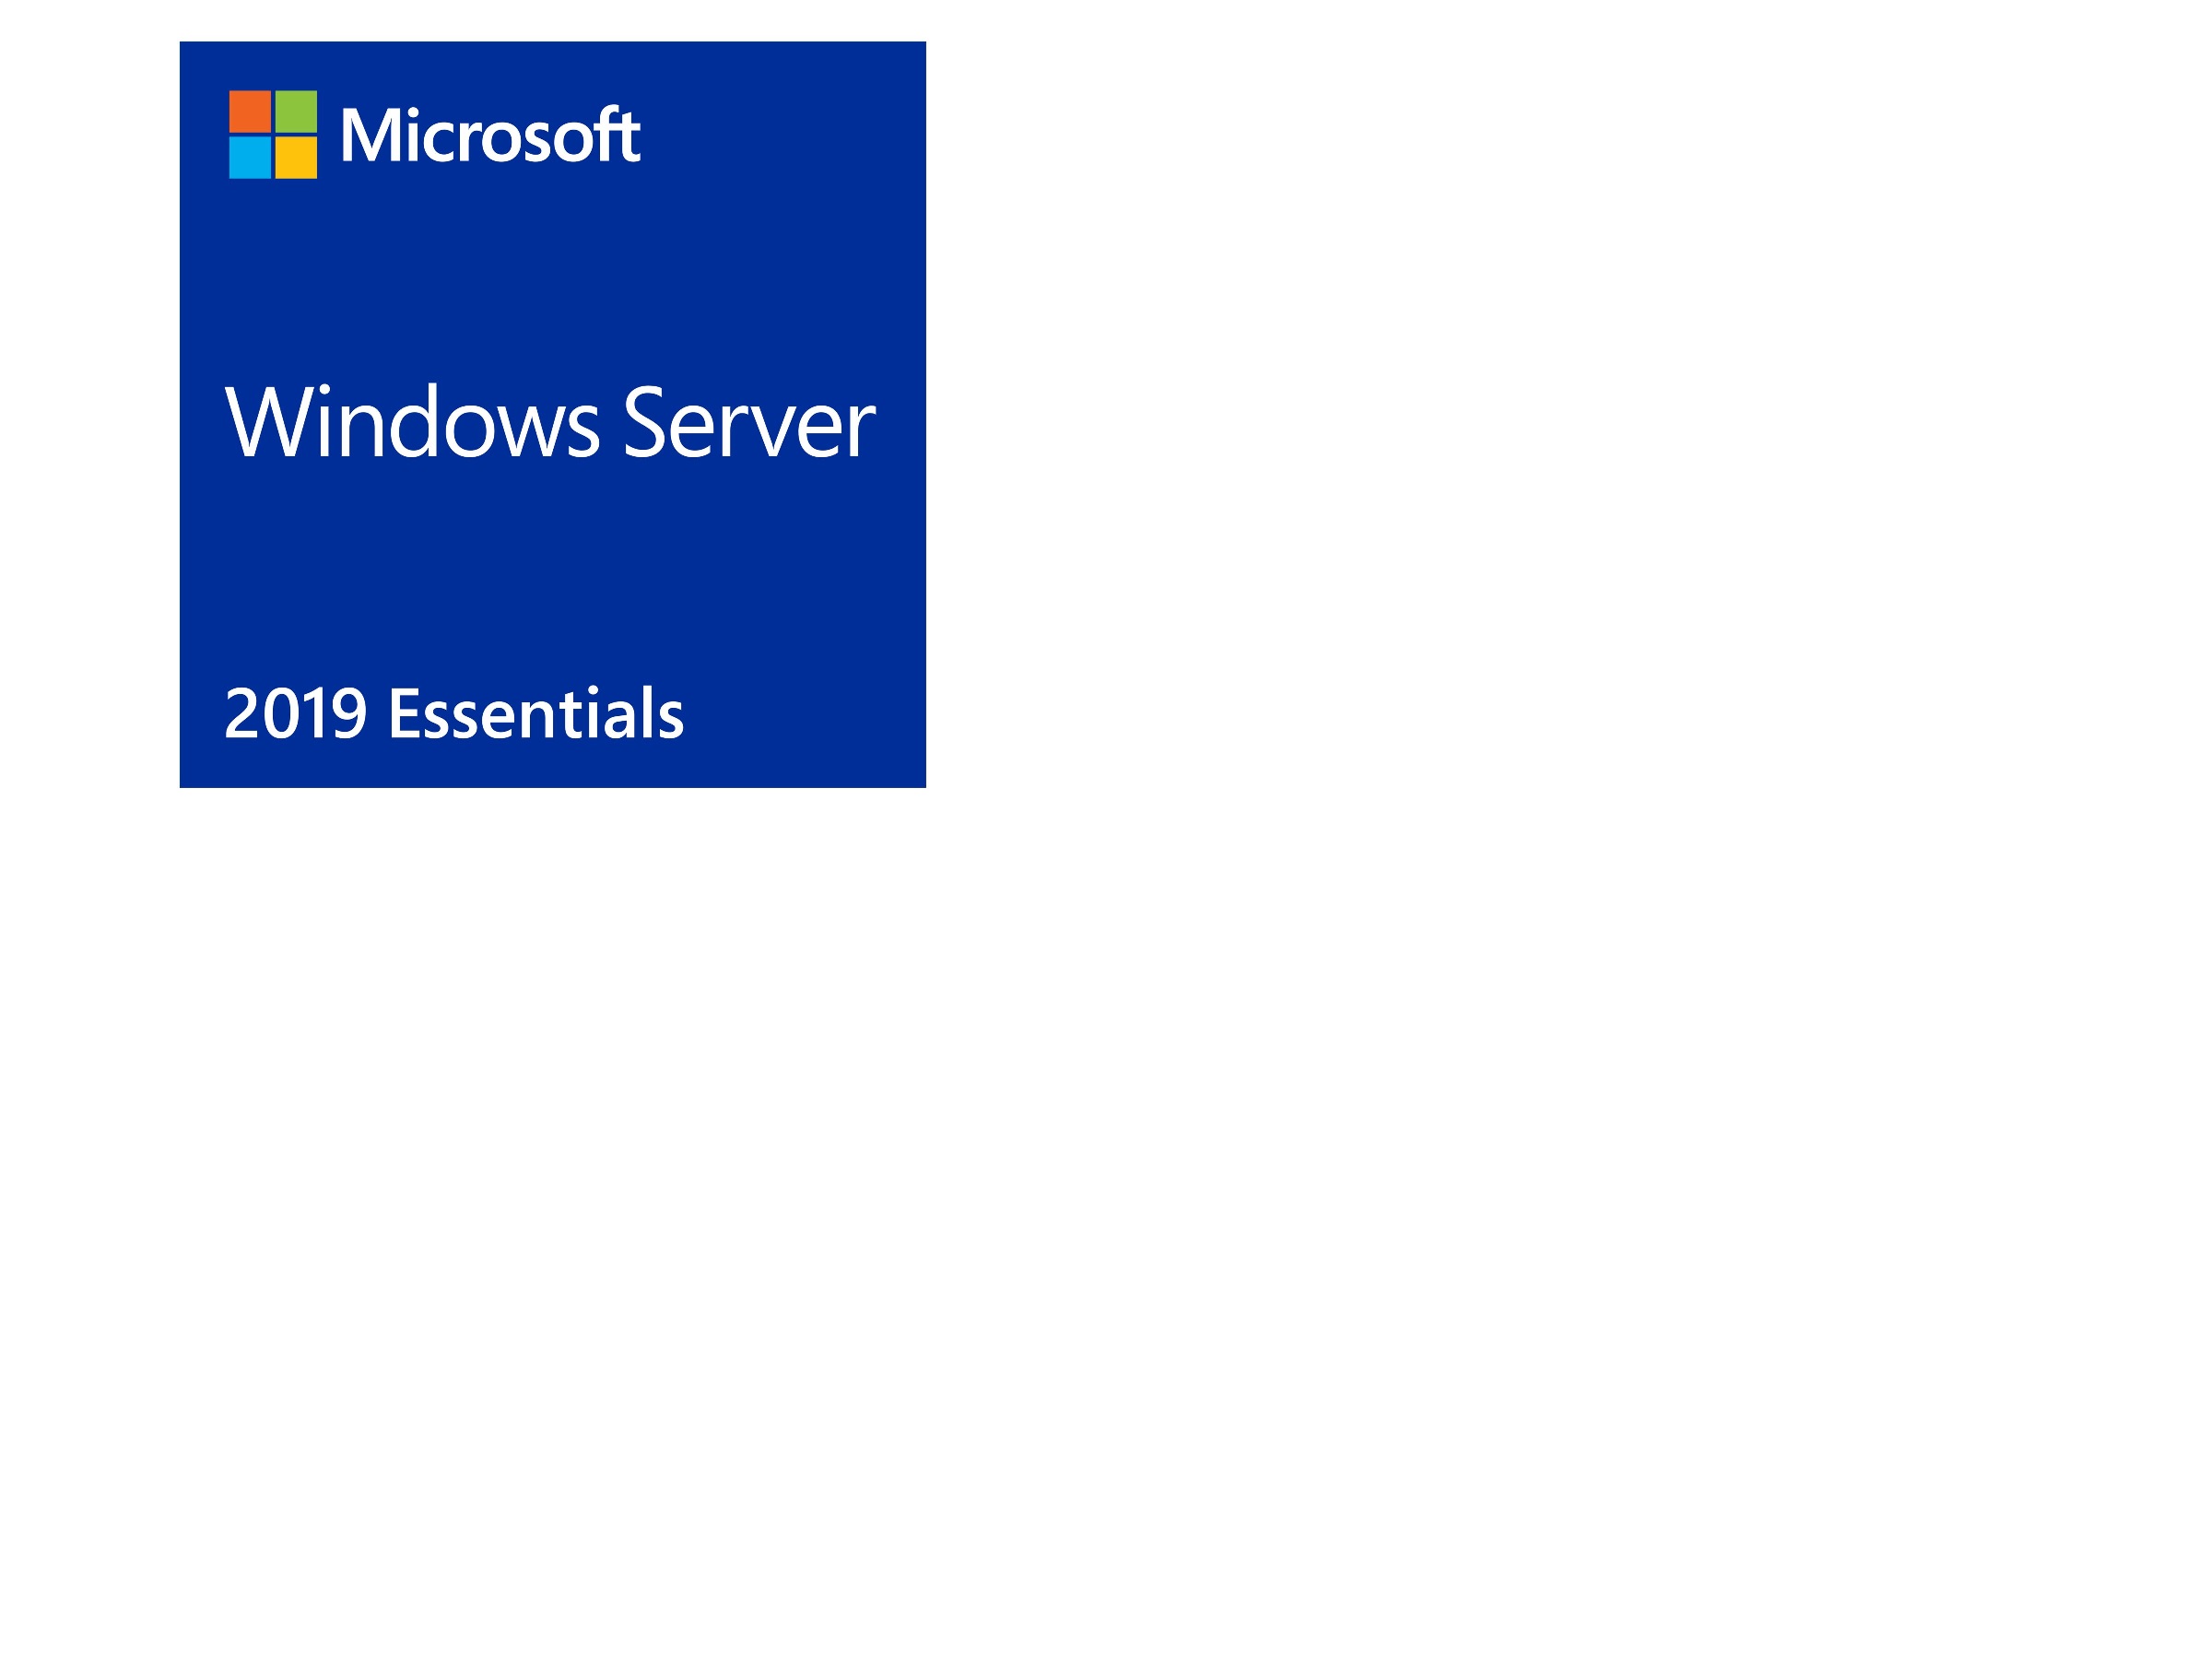  MICROSOFT WINDOWSSERVER ESSENTIALS 2019 OLV 1L NOLVL ADD PROD EACH <br><B>SPECIAL ORDER ITEM, NO RETURN NO REFUND, PLEASE CHOOSE CAREFULLY! Not sure, contact Microsoft for assistance on your requirement!</B>  